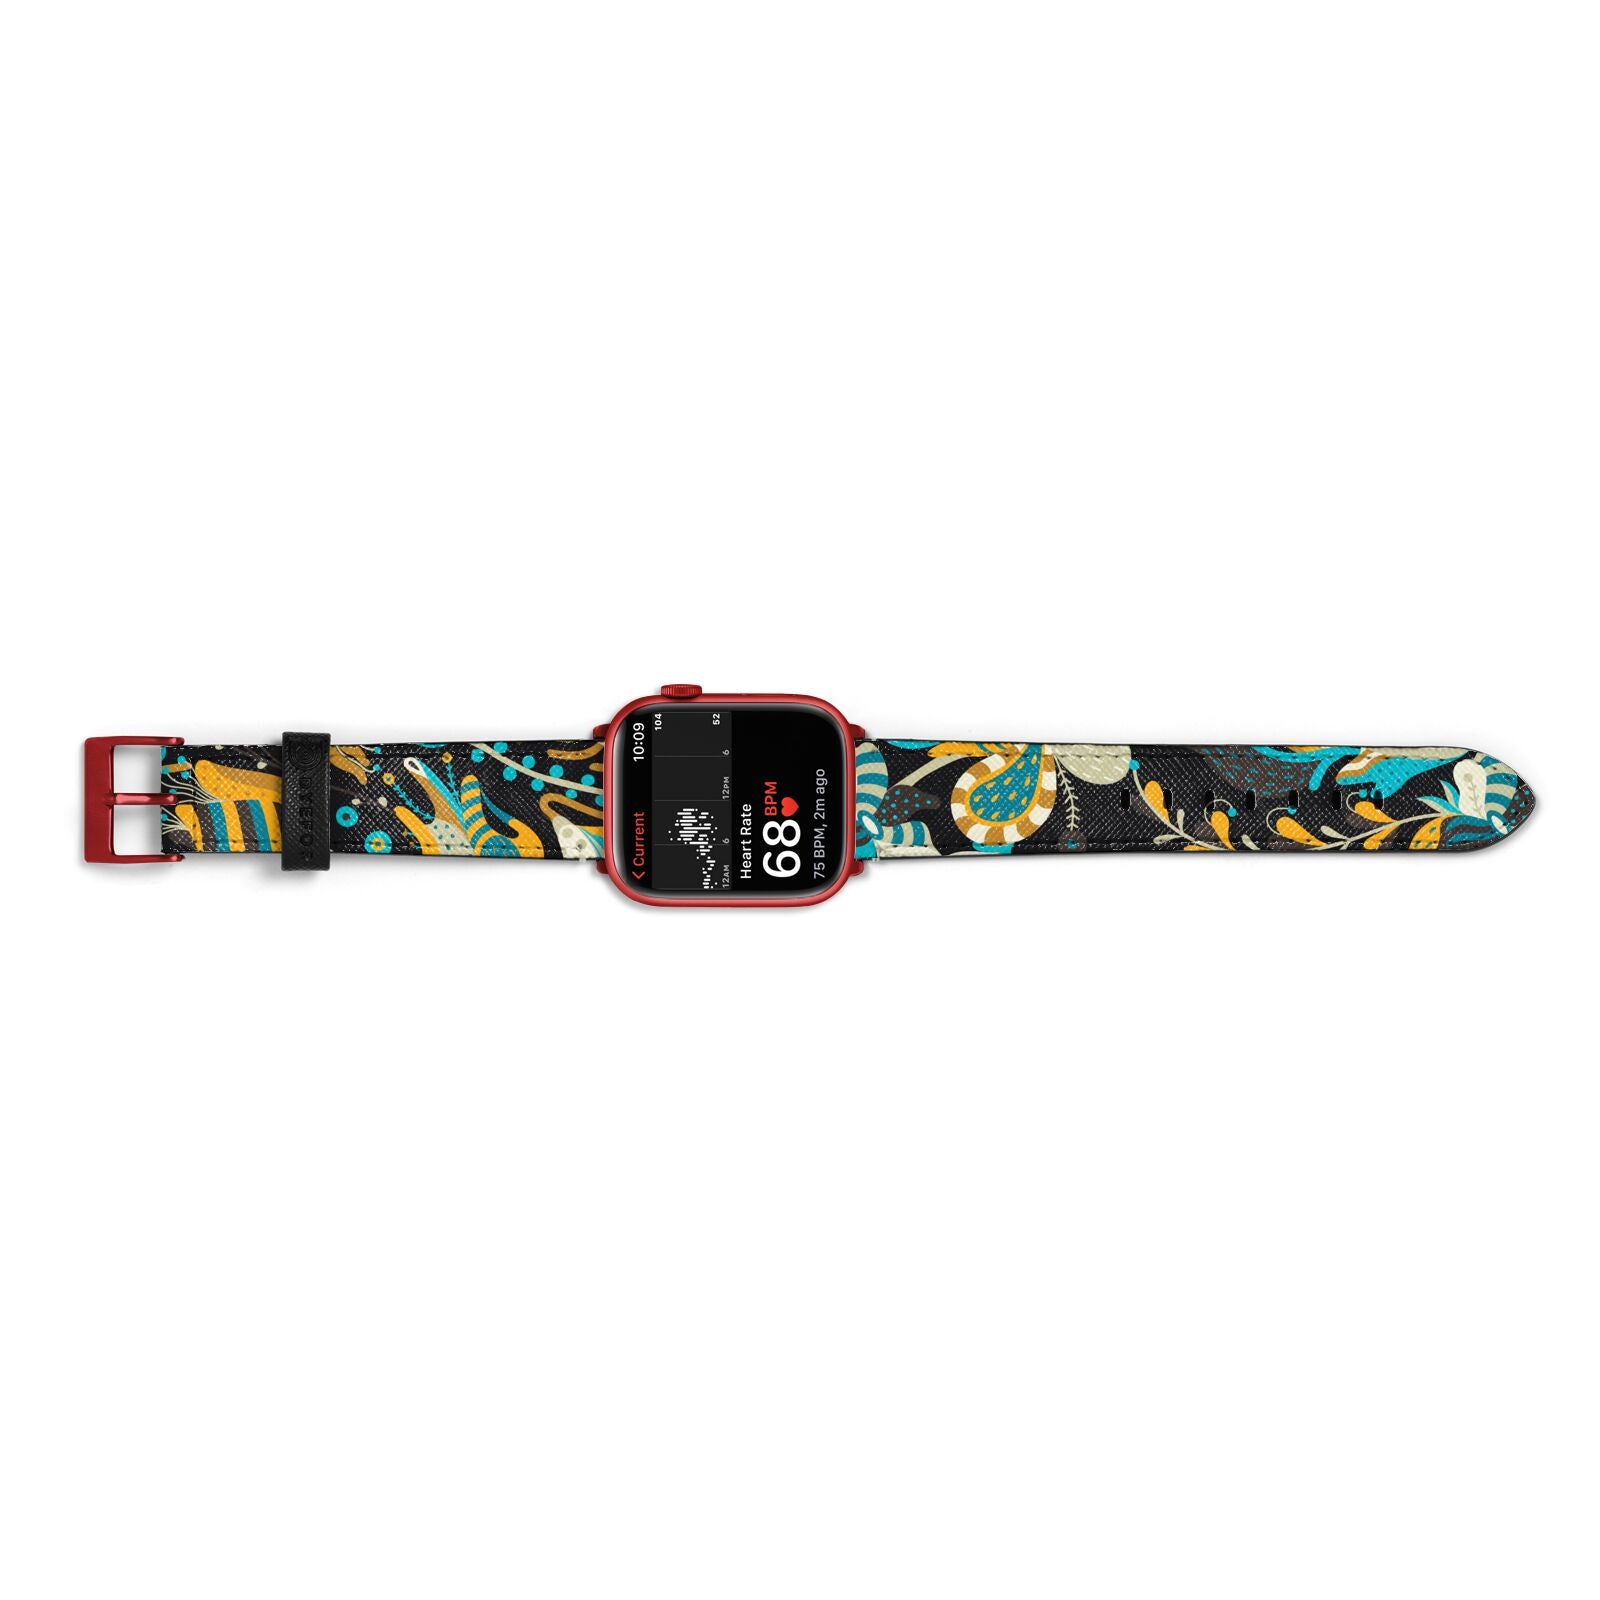 Colourful Floral Apple Watch Strap Size 38mm Landscape Image Red Hardware